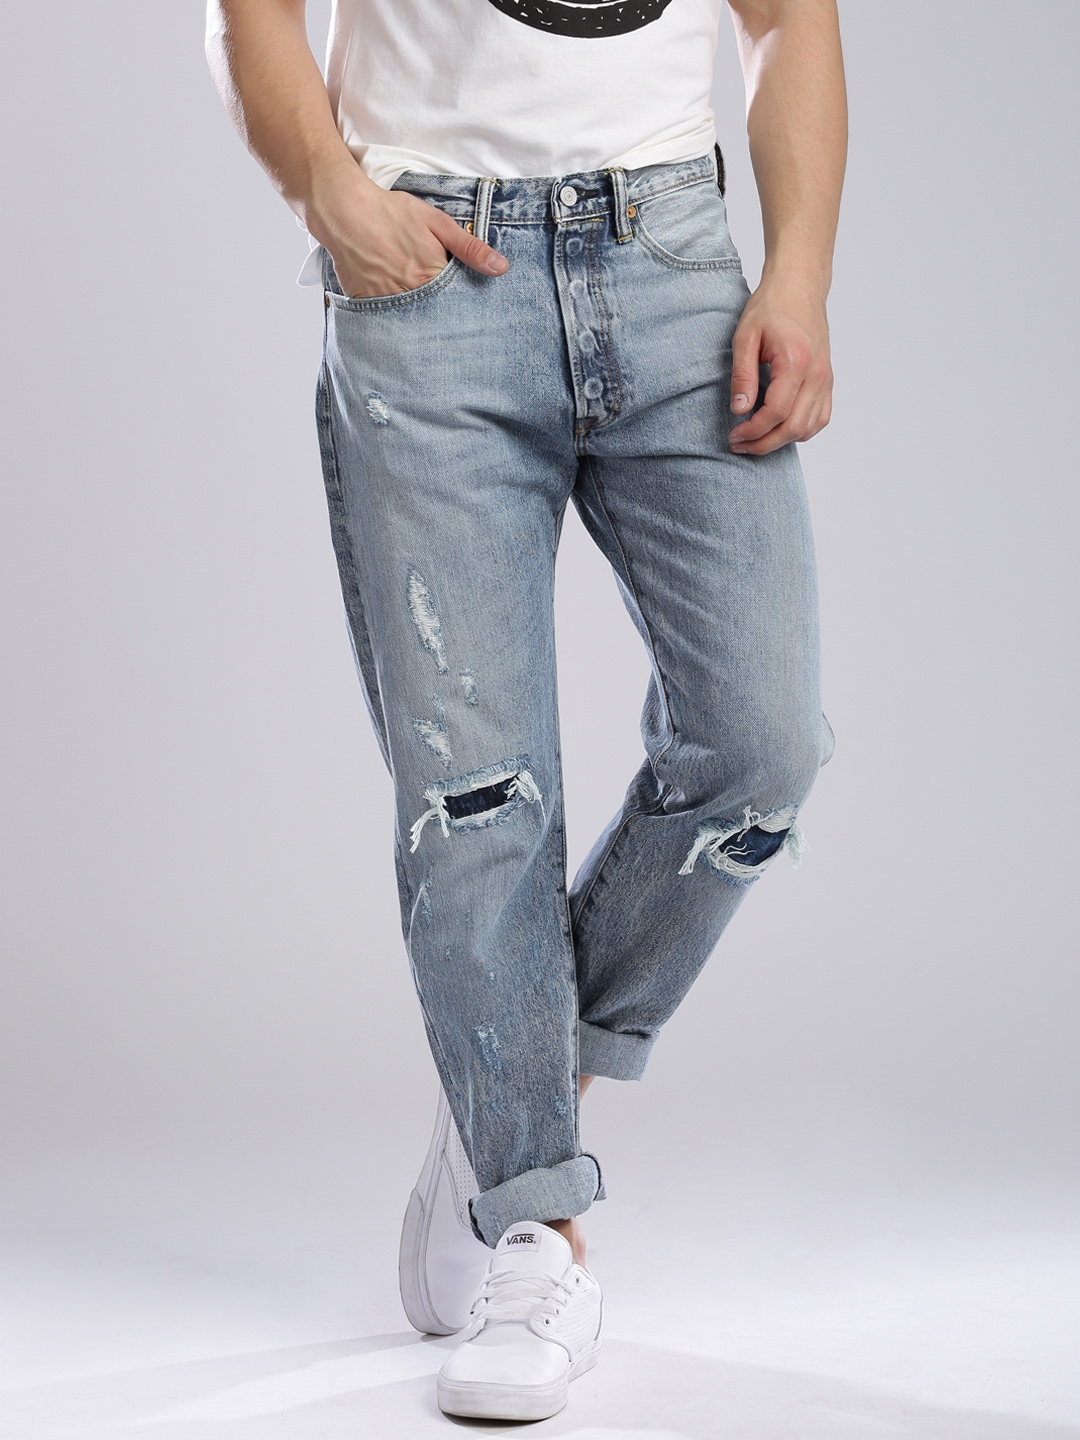 Buy Levi's Blue Original Tapered Fit Jeans 501 CT - Jeans for Men 1177627 |  Myntra